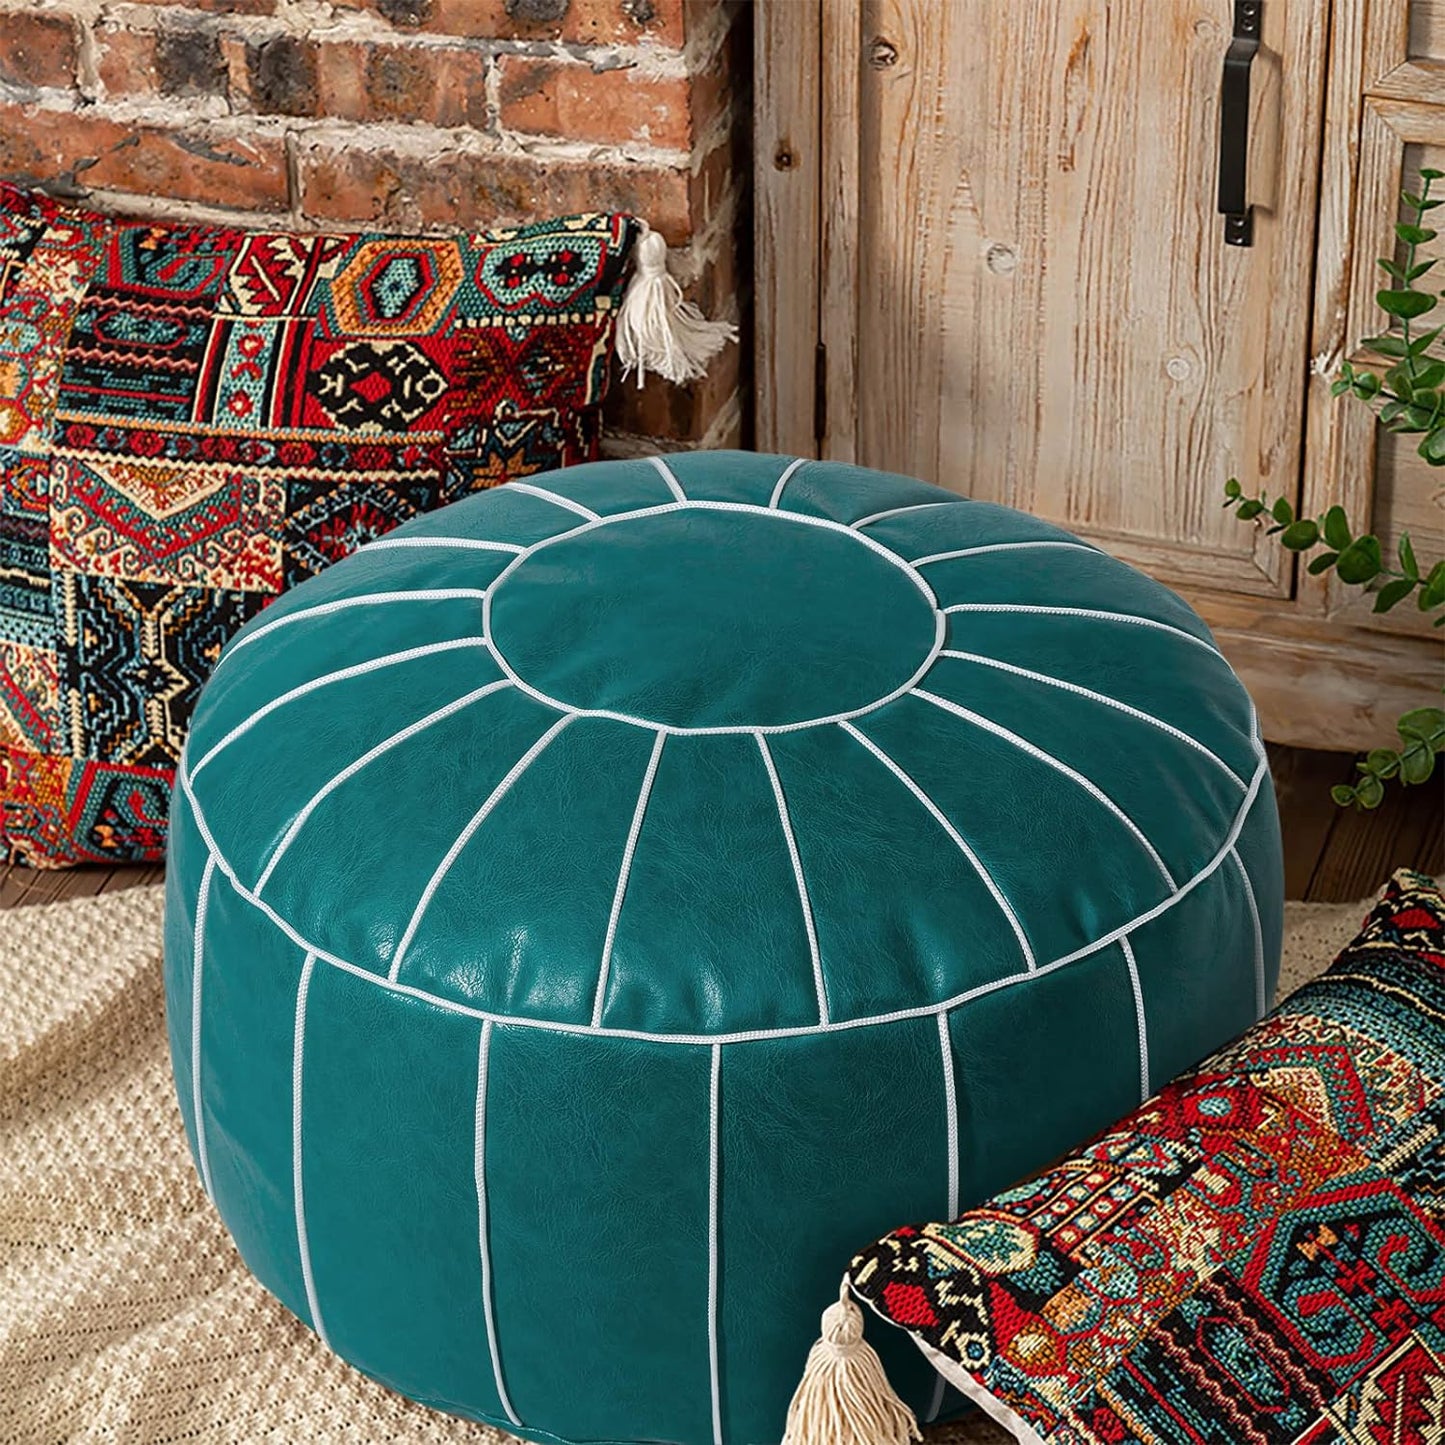 Vannaey Pouf Ottoman Foot Stool, Unstuffed Handmade Round Ottoman, PU Leather Pouf Cover Footstool Footrest Floor Cushion with Storage Moroccan Poufs for Living Room, Bedroom (No Stuffing)